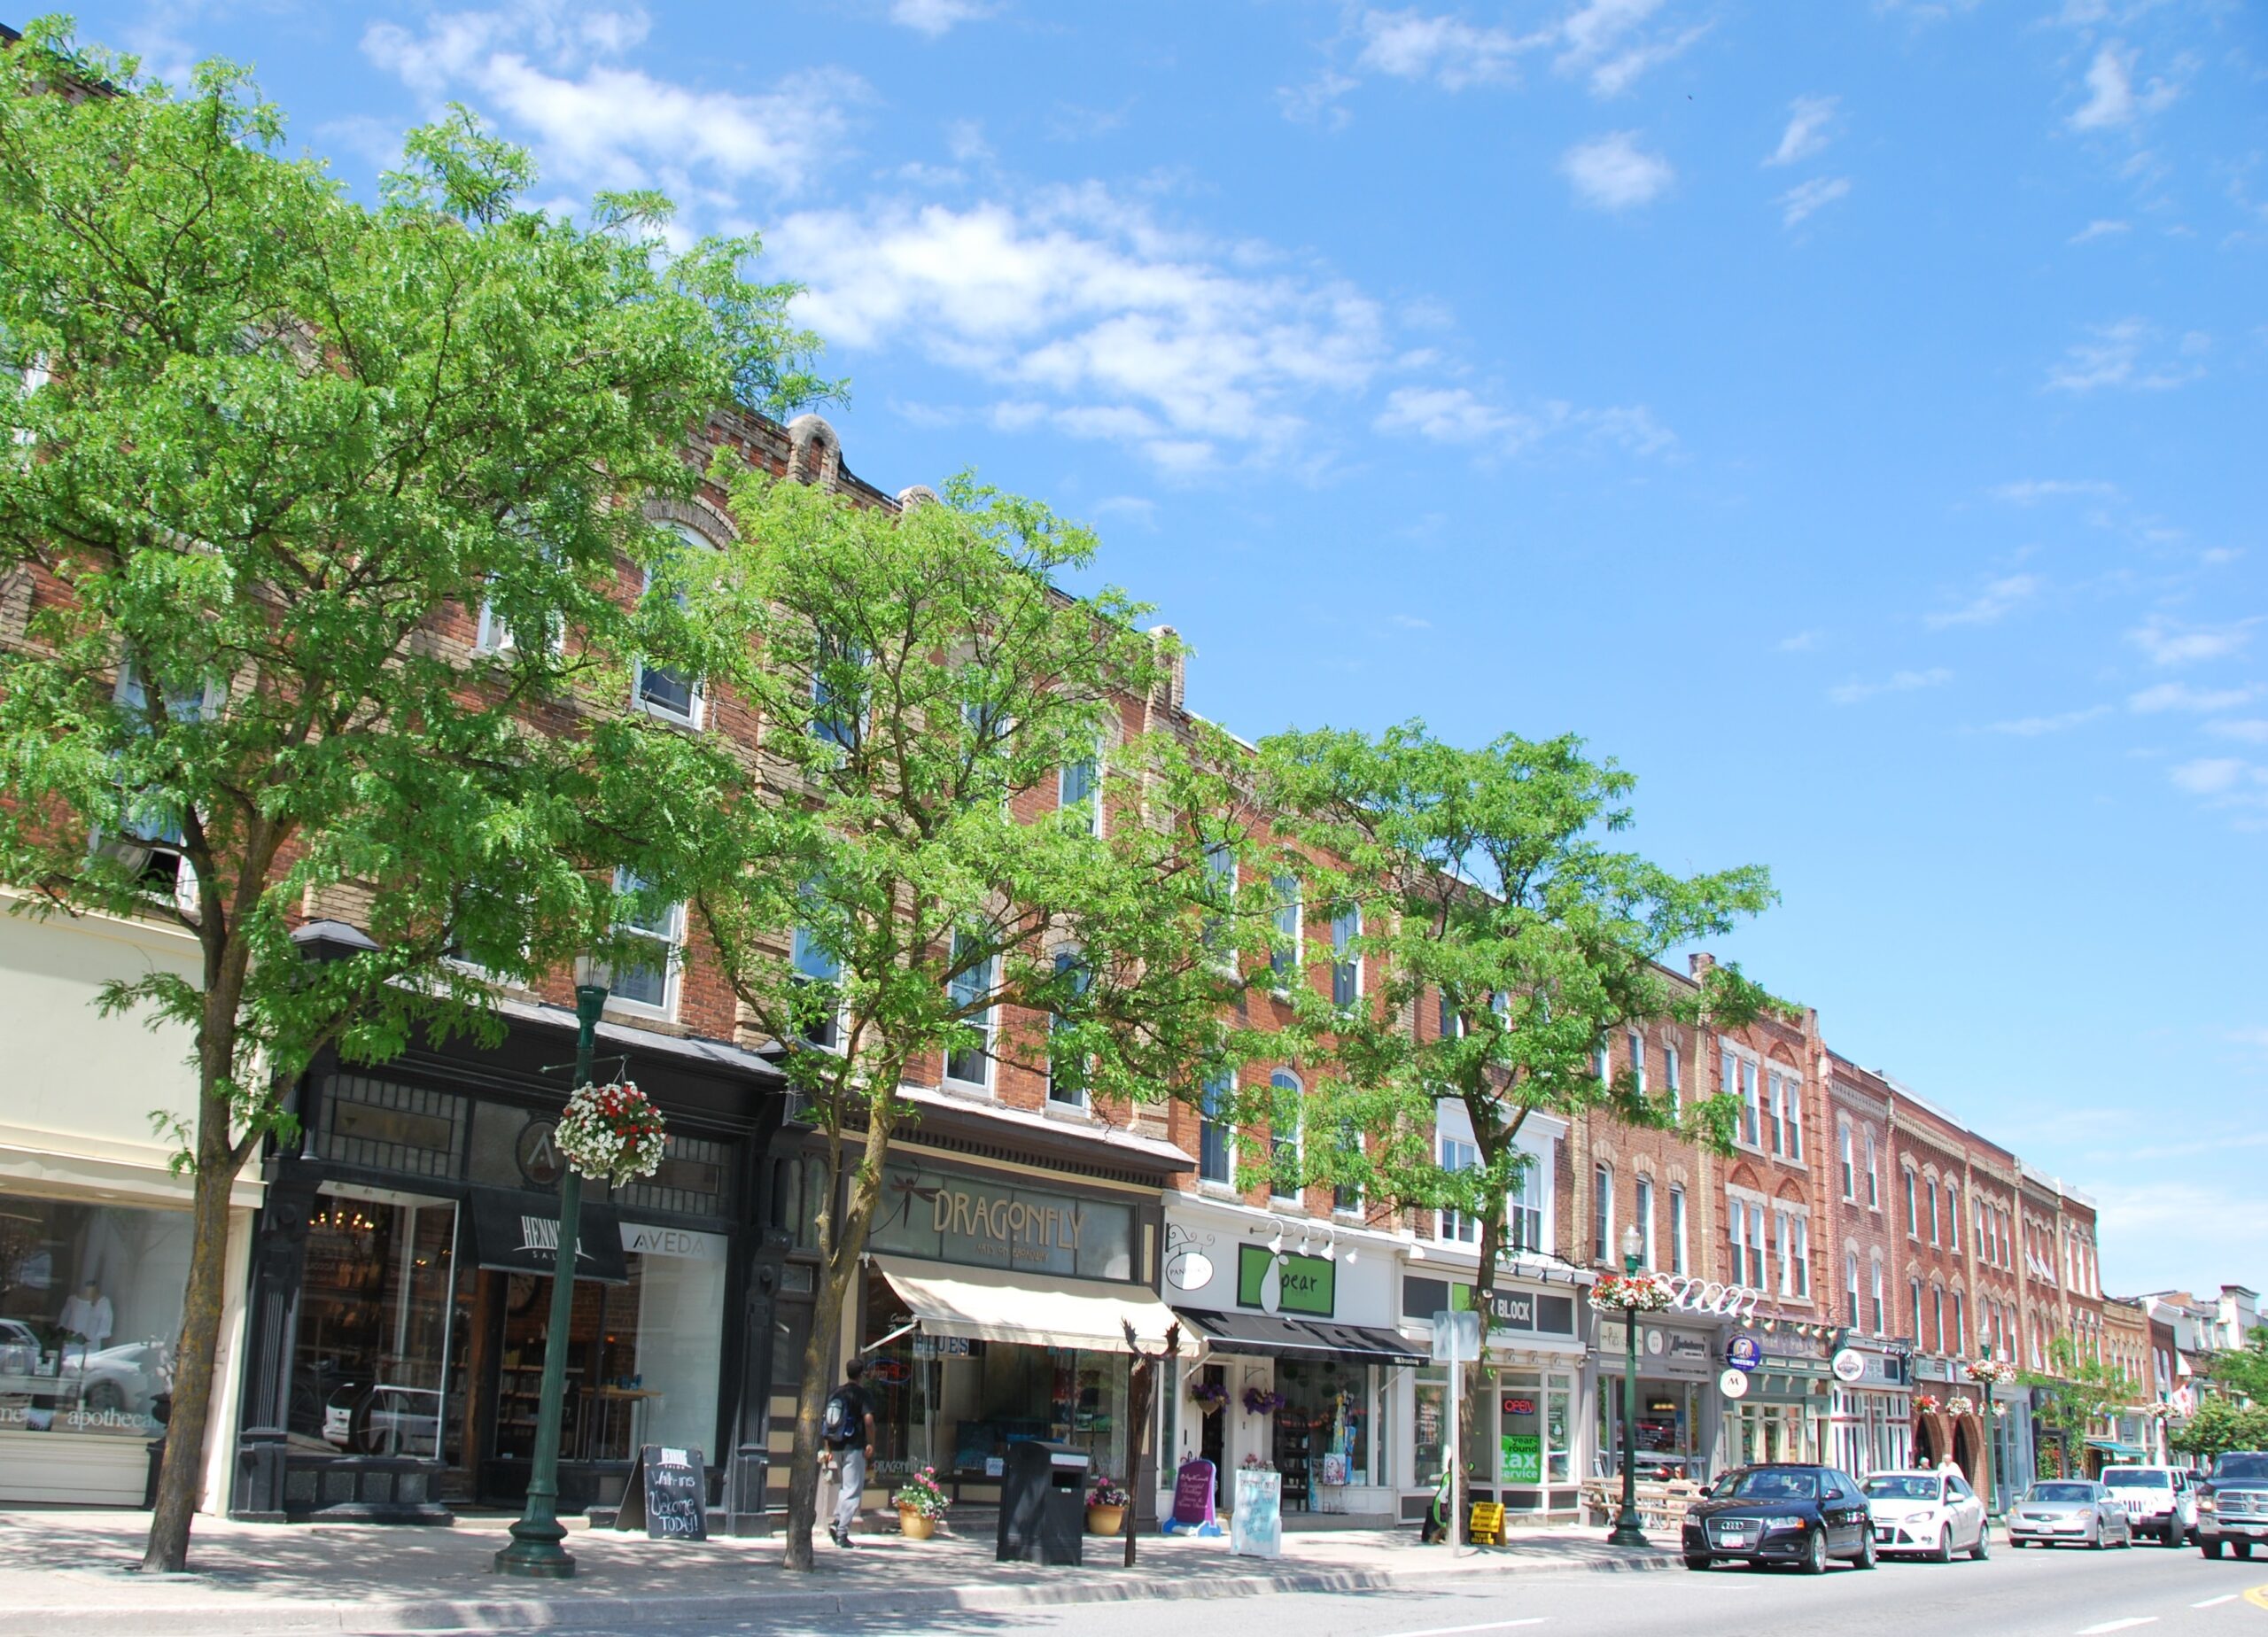 Image of the downtown core in Orangeville